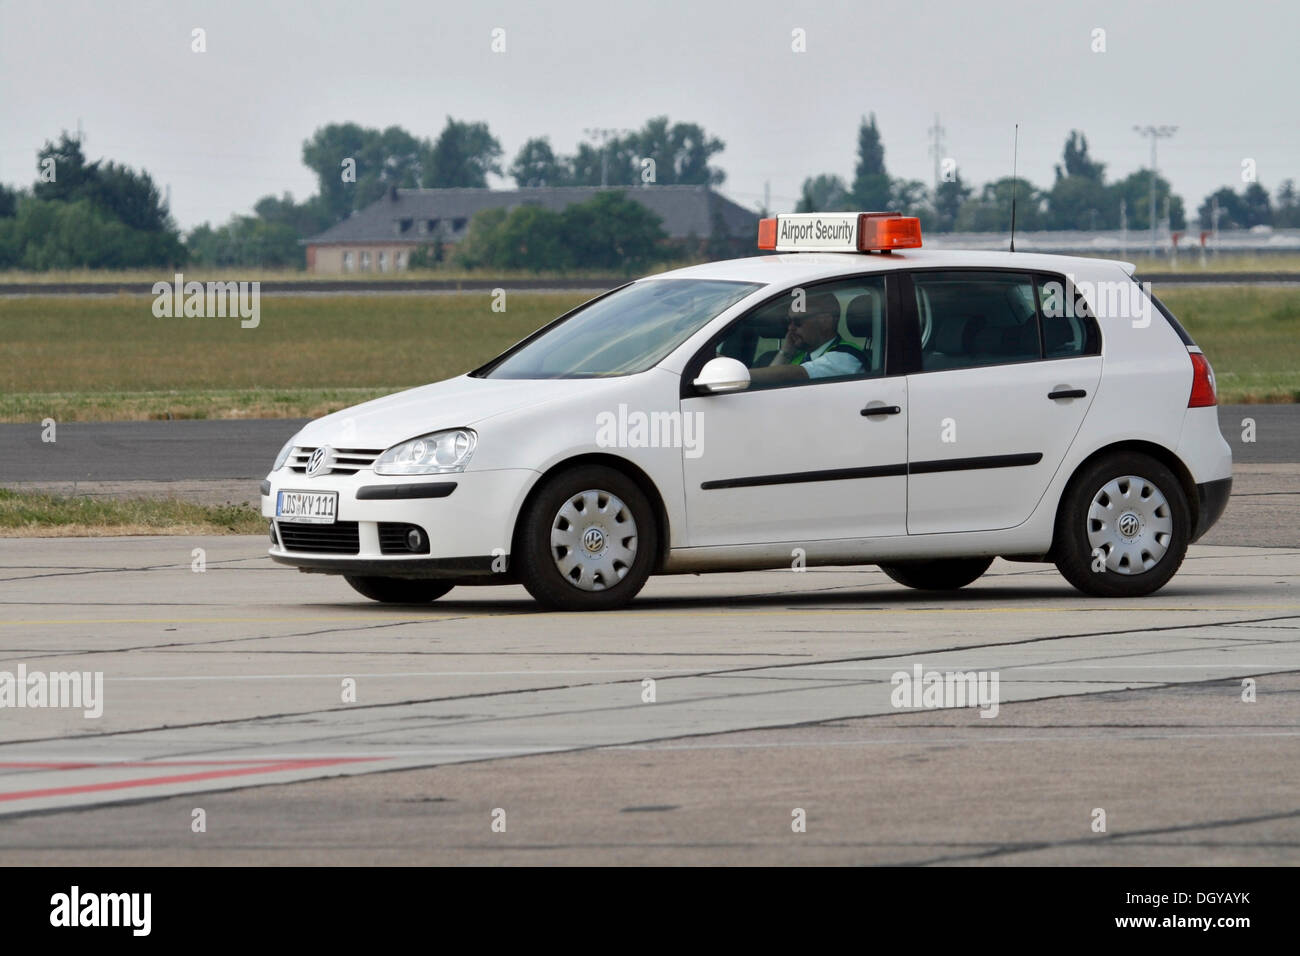 Airport Security, Emergency Vehicle Stock Photo